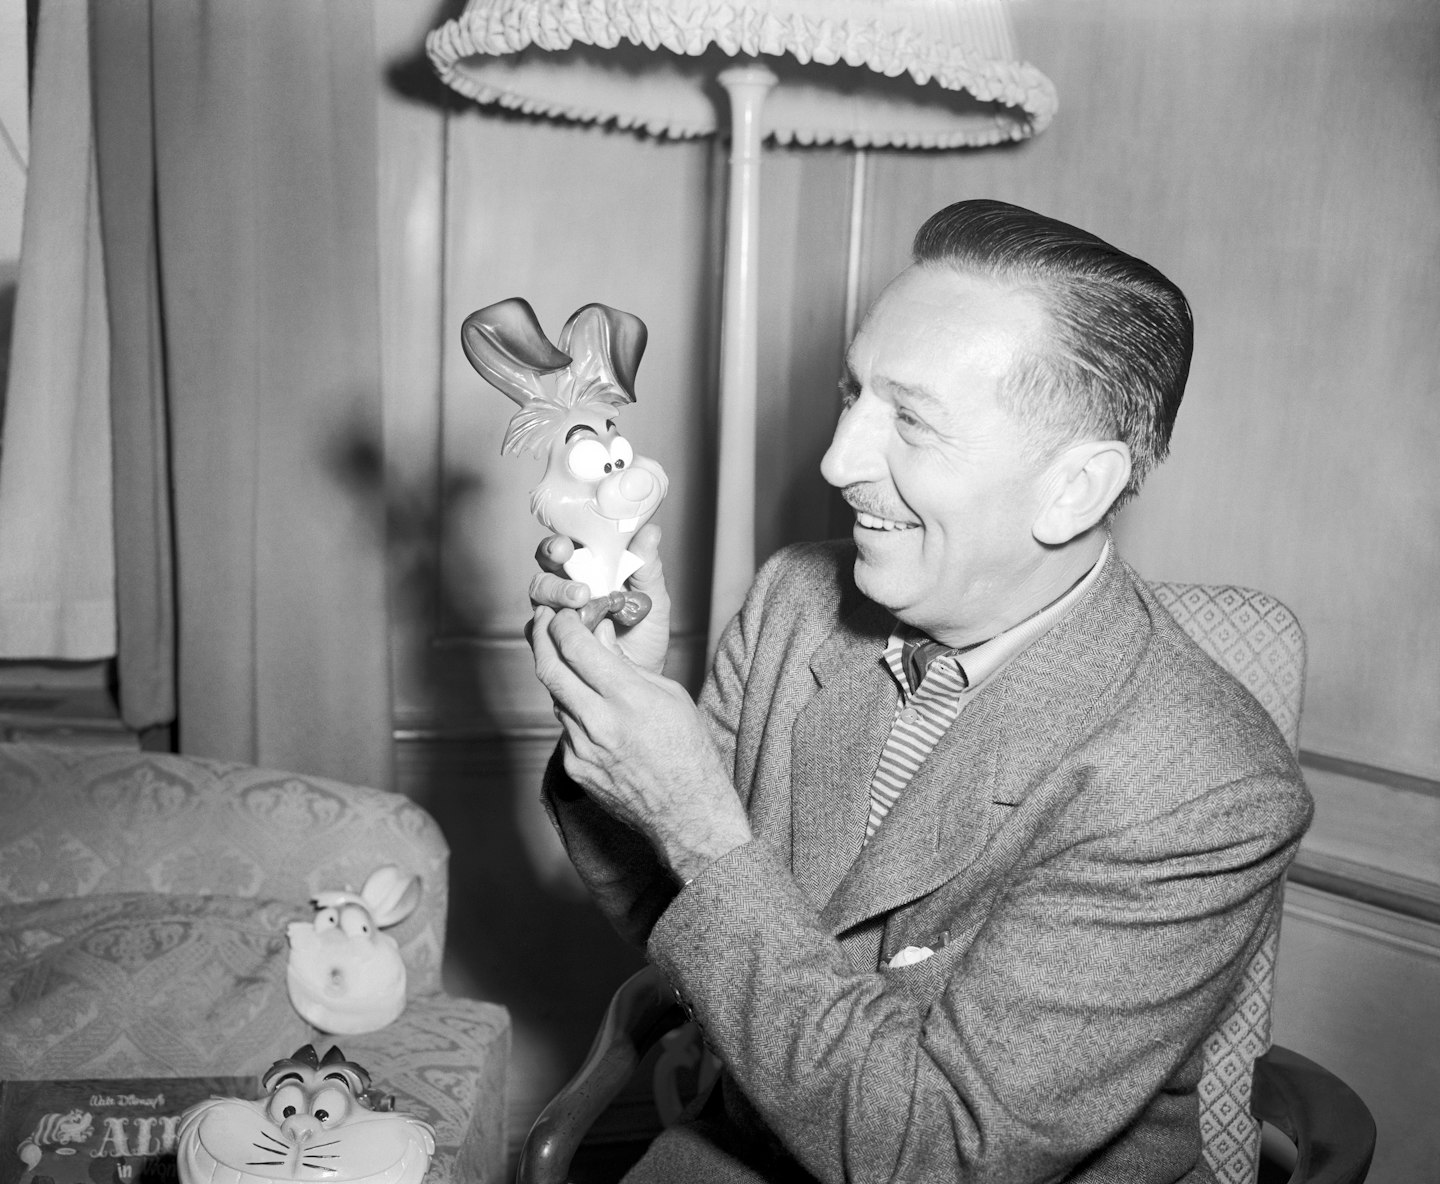 Walt Disney with one of his own creations, the 'March Hare', from his latest cartoon film 'Alice in Wonderland'.